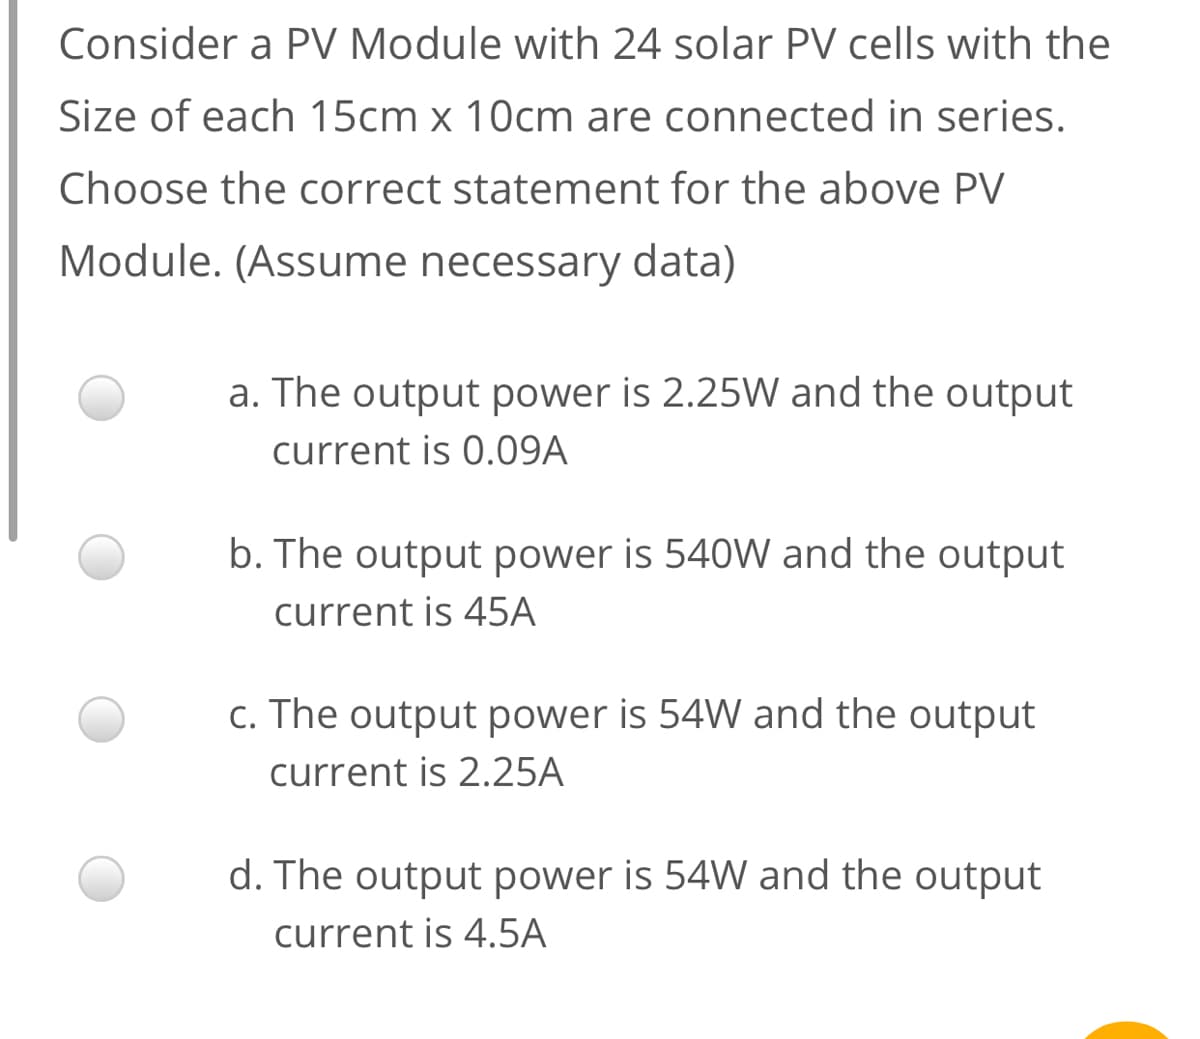 Consider a PV Module with 24 solar PV cells with the
Size of each 15cm x 10cm are connected in series.
Choose the correct statement for the above PV
Module. (Assume necessary data)
a. The output power is 2.25W and the output
current is 0.09A
b. The output power is 540W and the output
current is 45A
c. The output power is 54W and the output
current is 2.25A
d. The output power is 54W and the output
current is 4.5A
